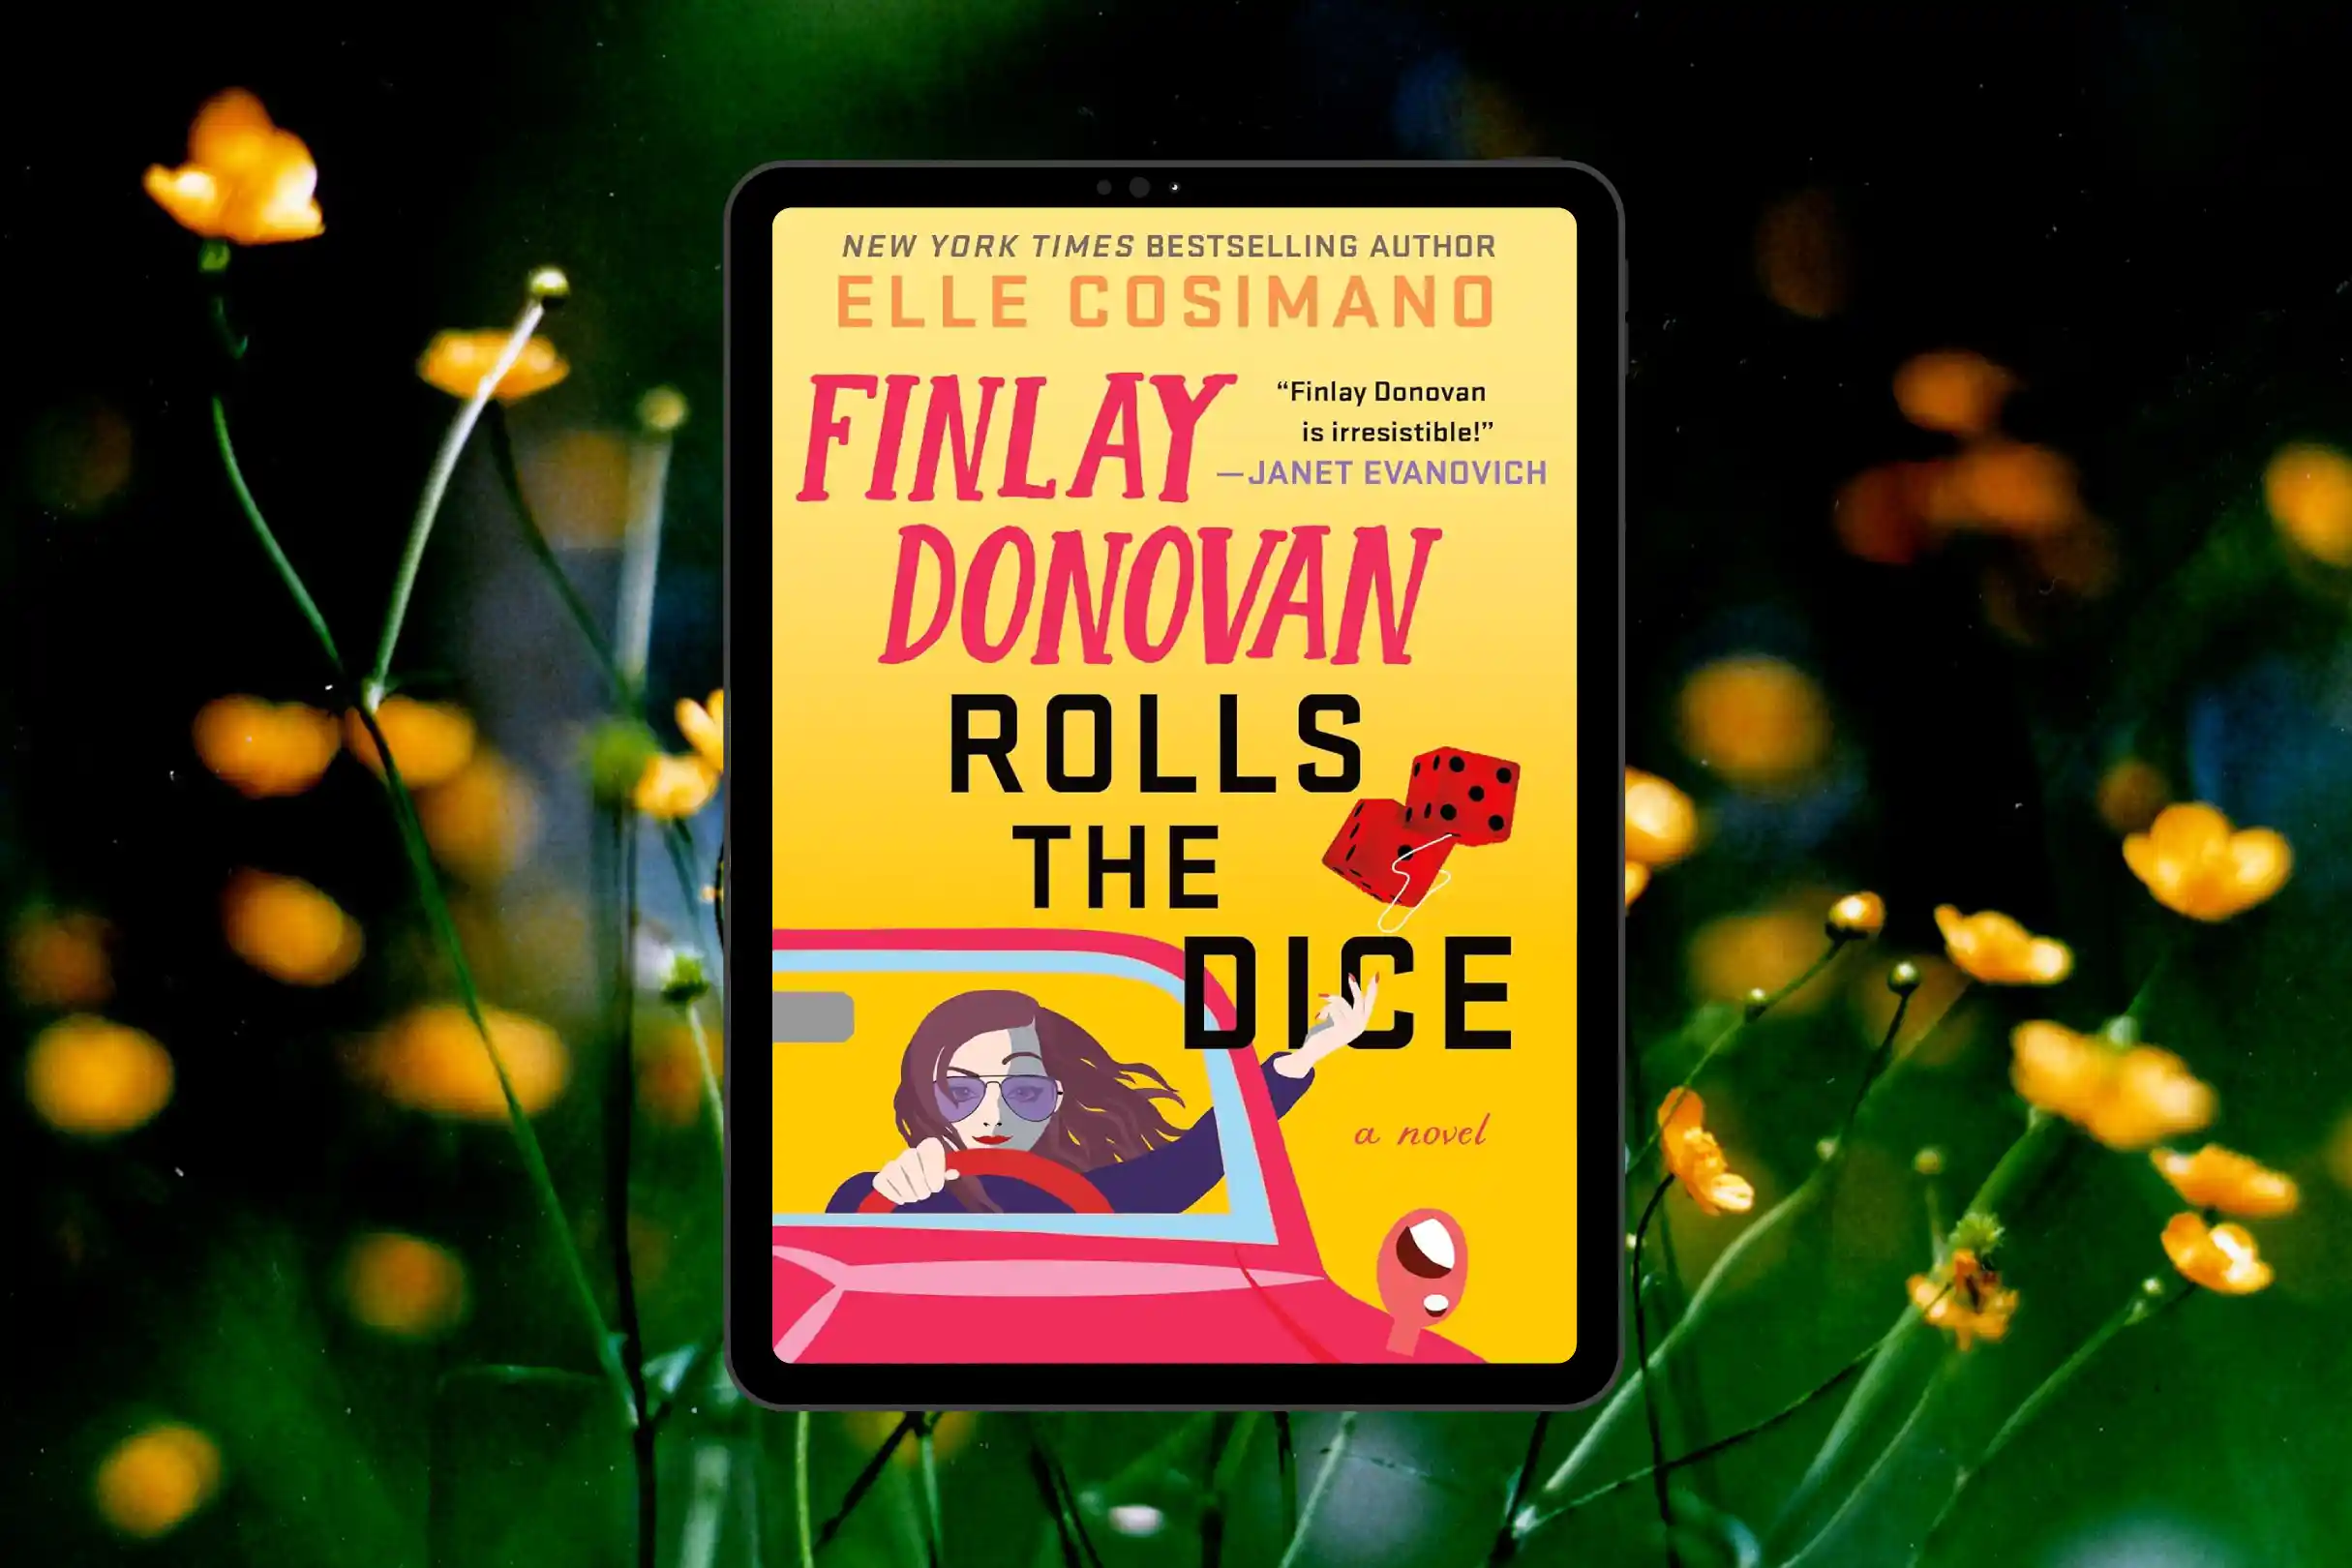 finlay_donovan_rolls_the_dice_discussion_guide